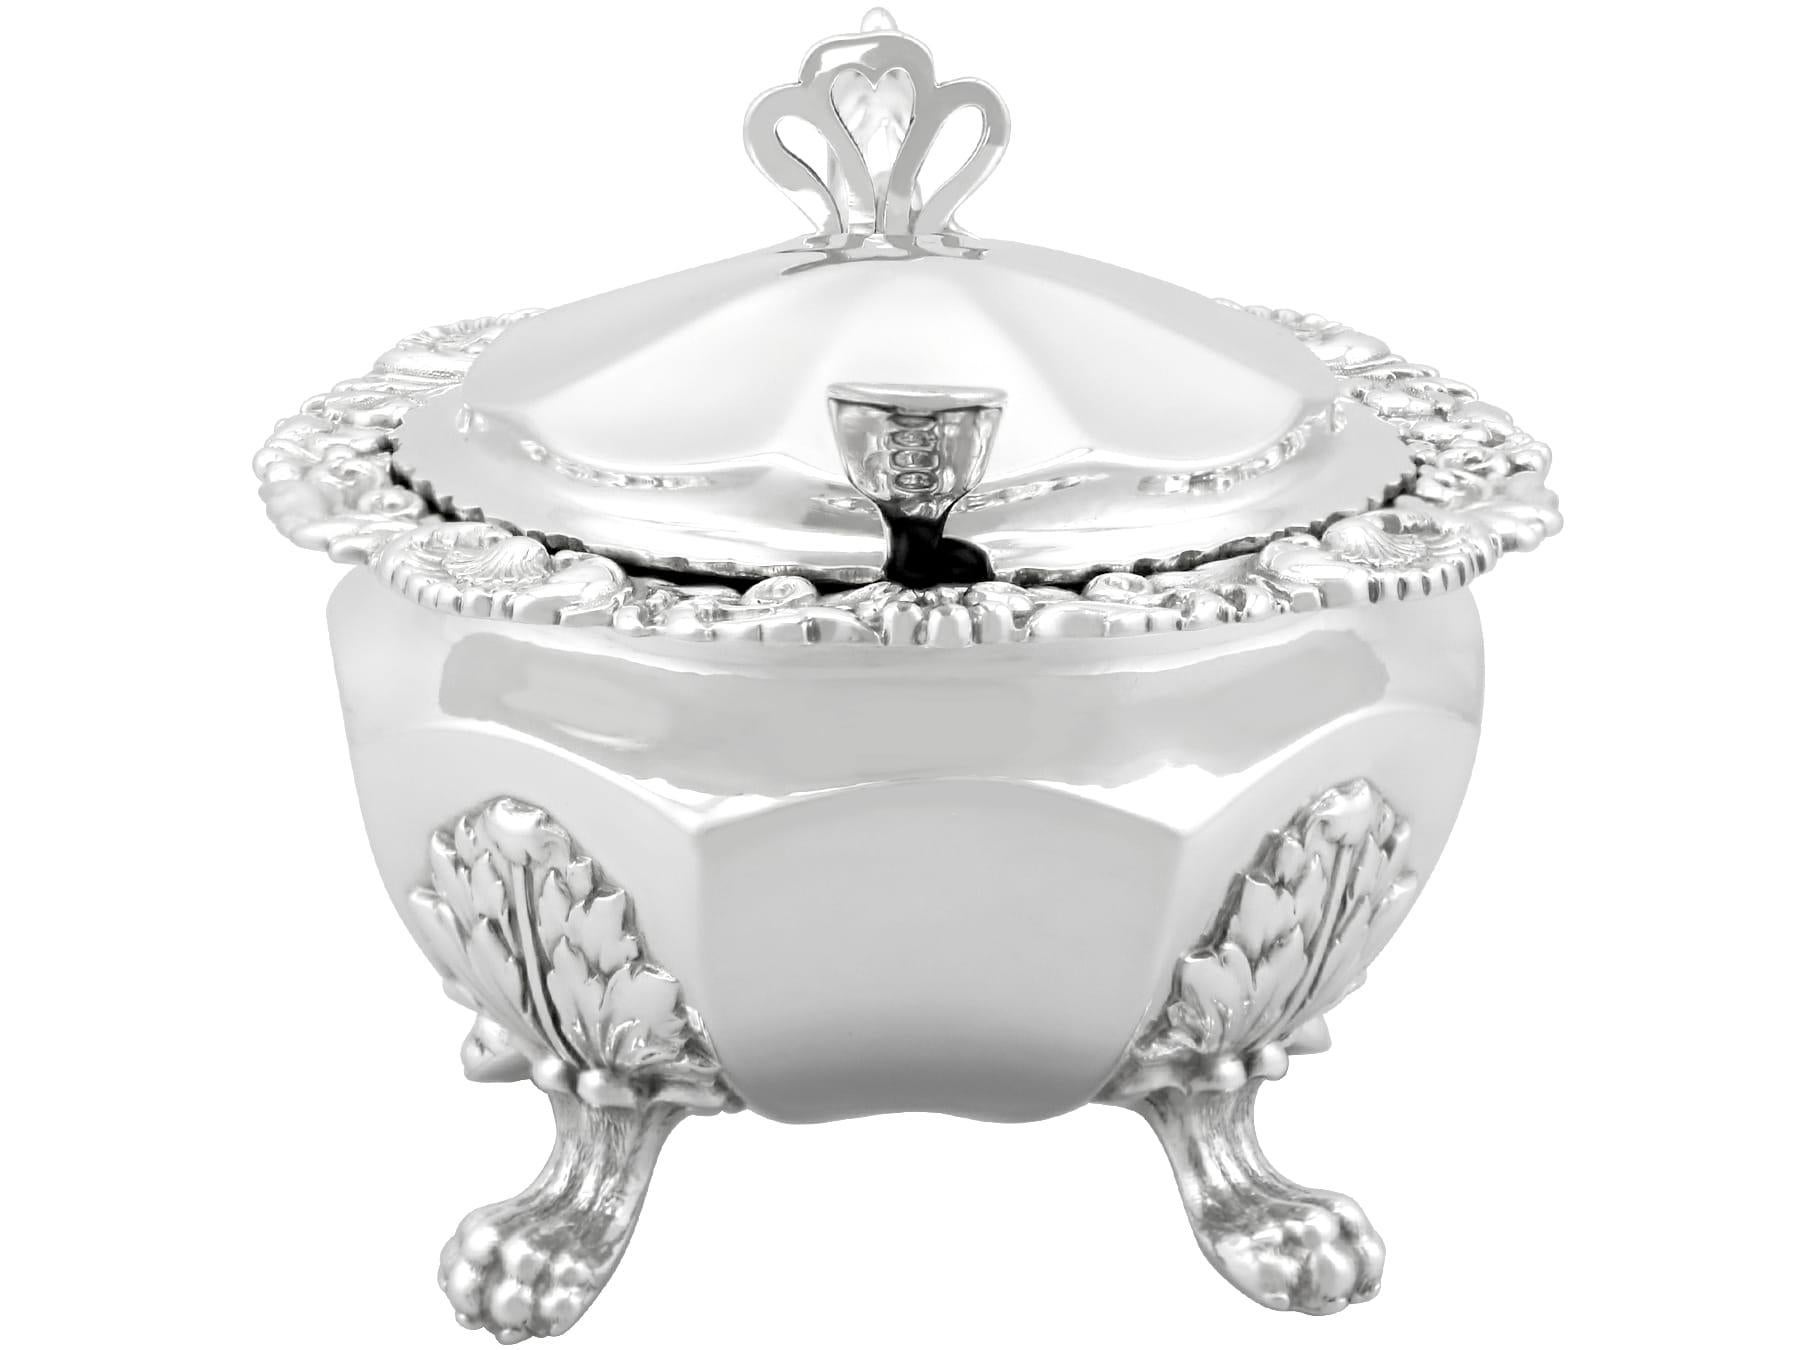 English Antique Victorian Sterling Silver Regency Style Mustard Pot (1840) For Sale